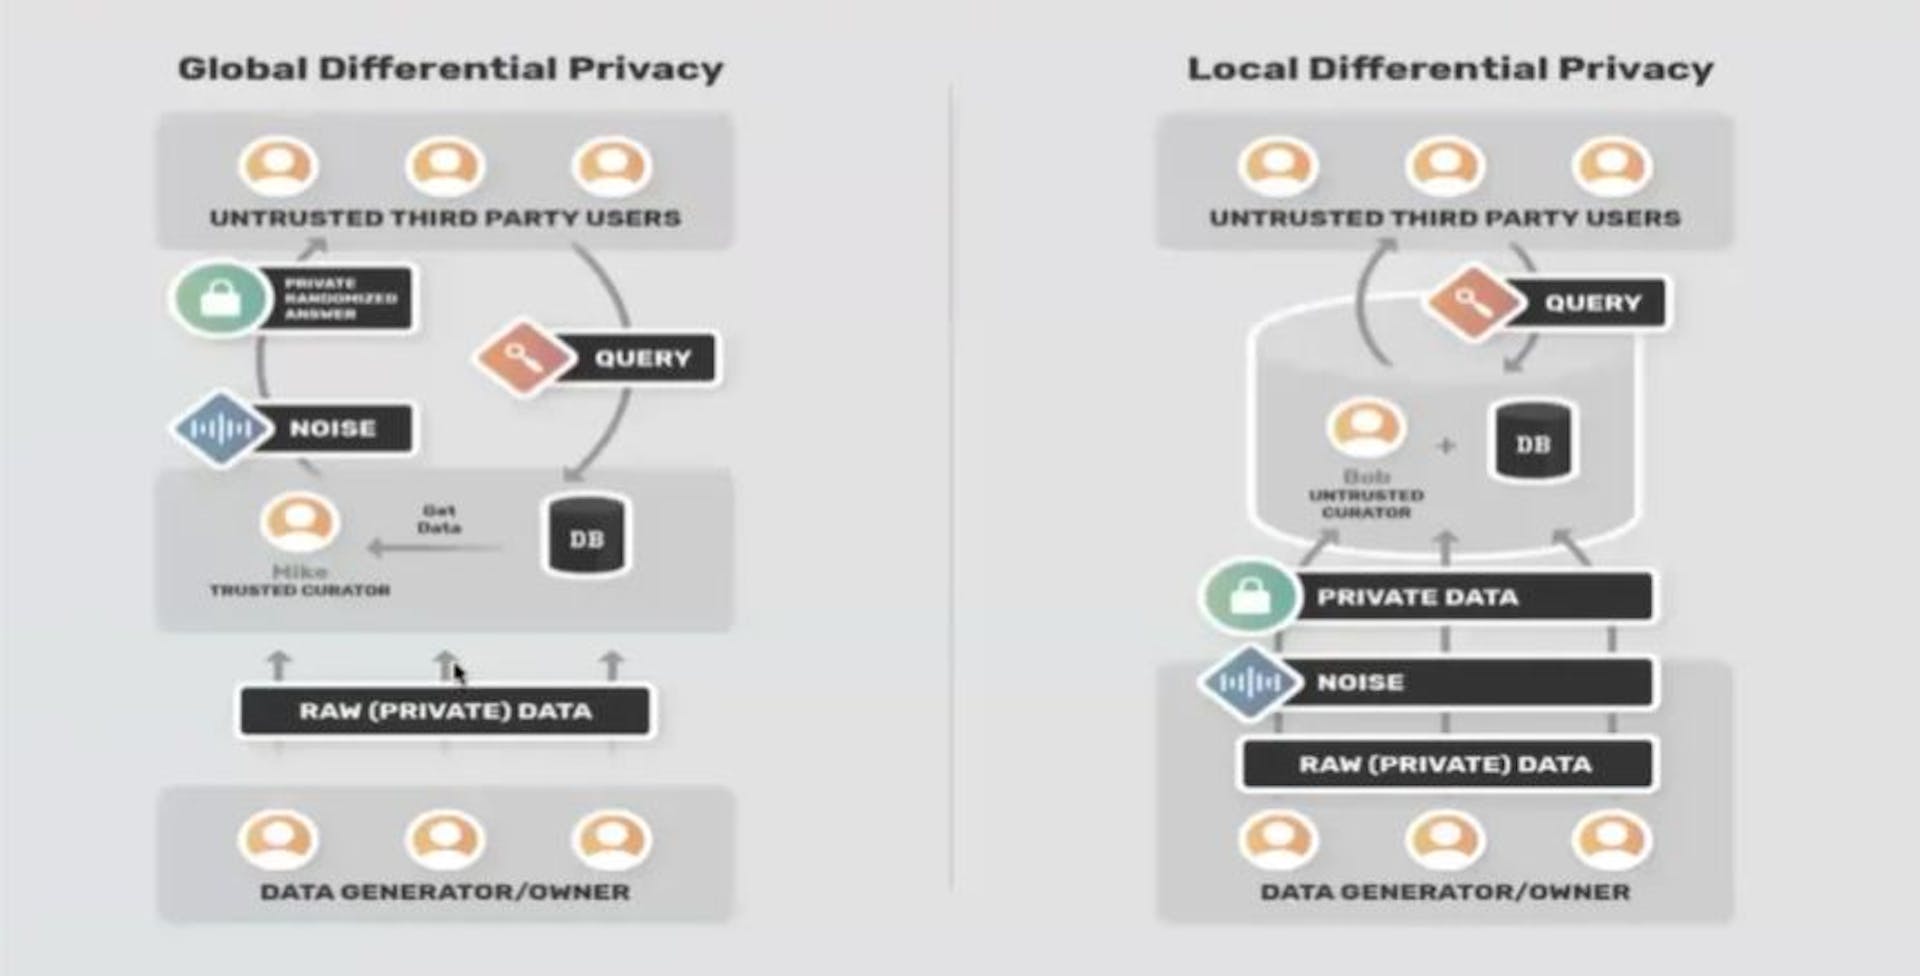 Global and Local Differential Privacy